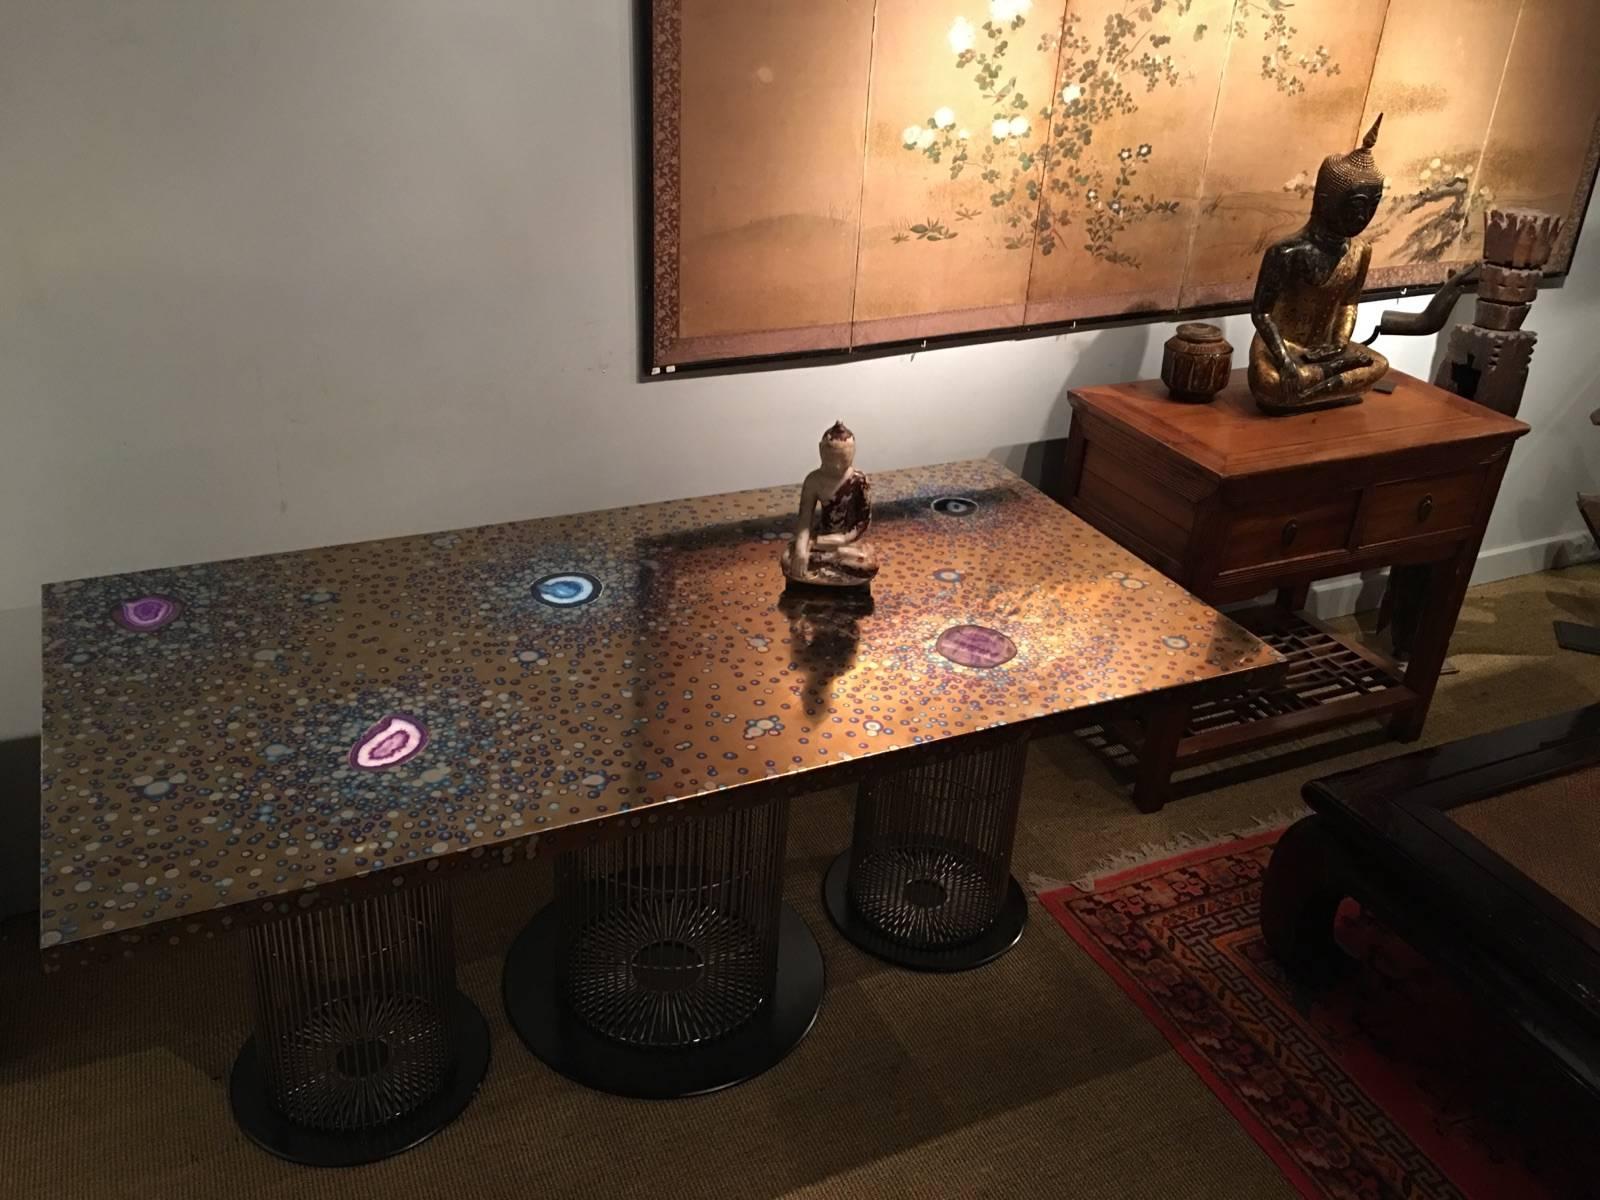 Galaxie" is a modern patinated titanium table, inlaid with agates.
Samples on demand, different patinas and colors available
Custom sizes on demand
Global shipping
Competitive prices

Passion for metal and aviation

Xavier Mennessier